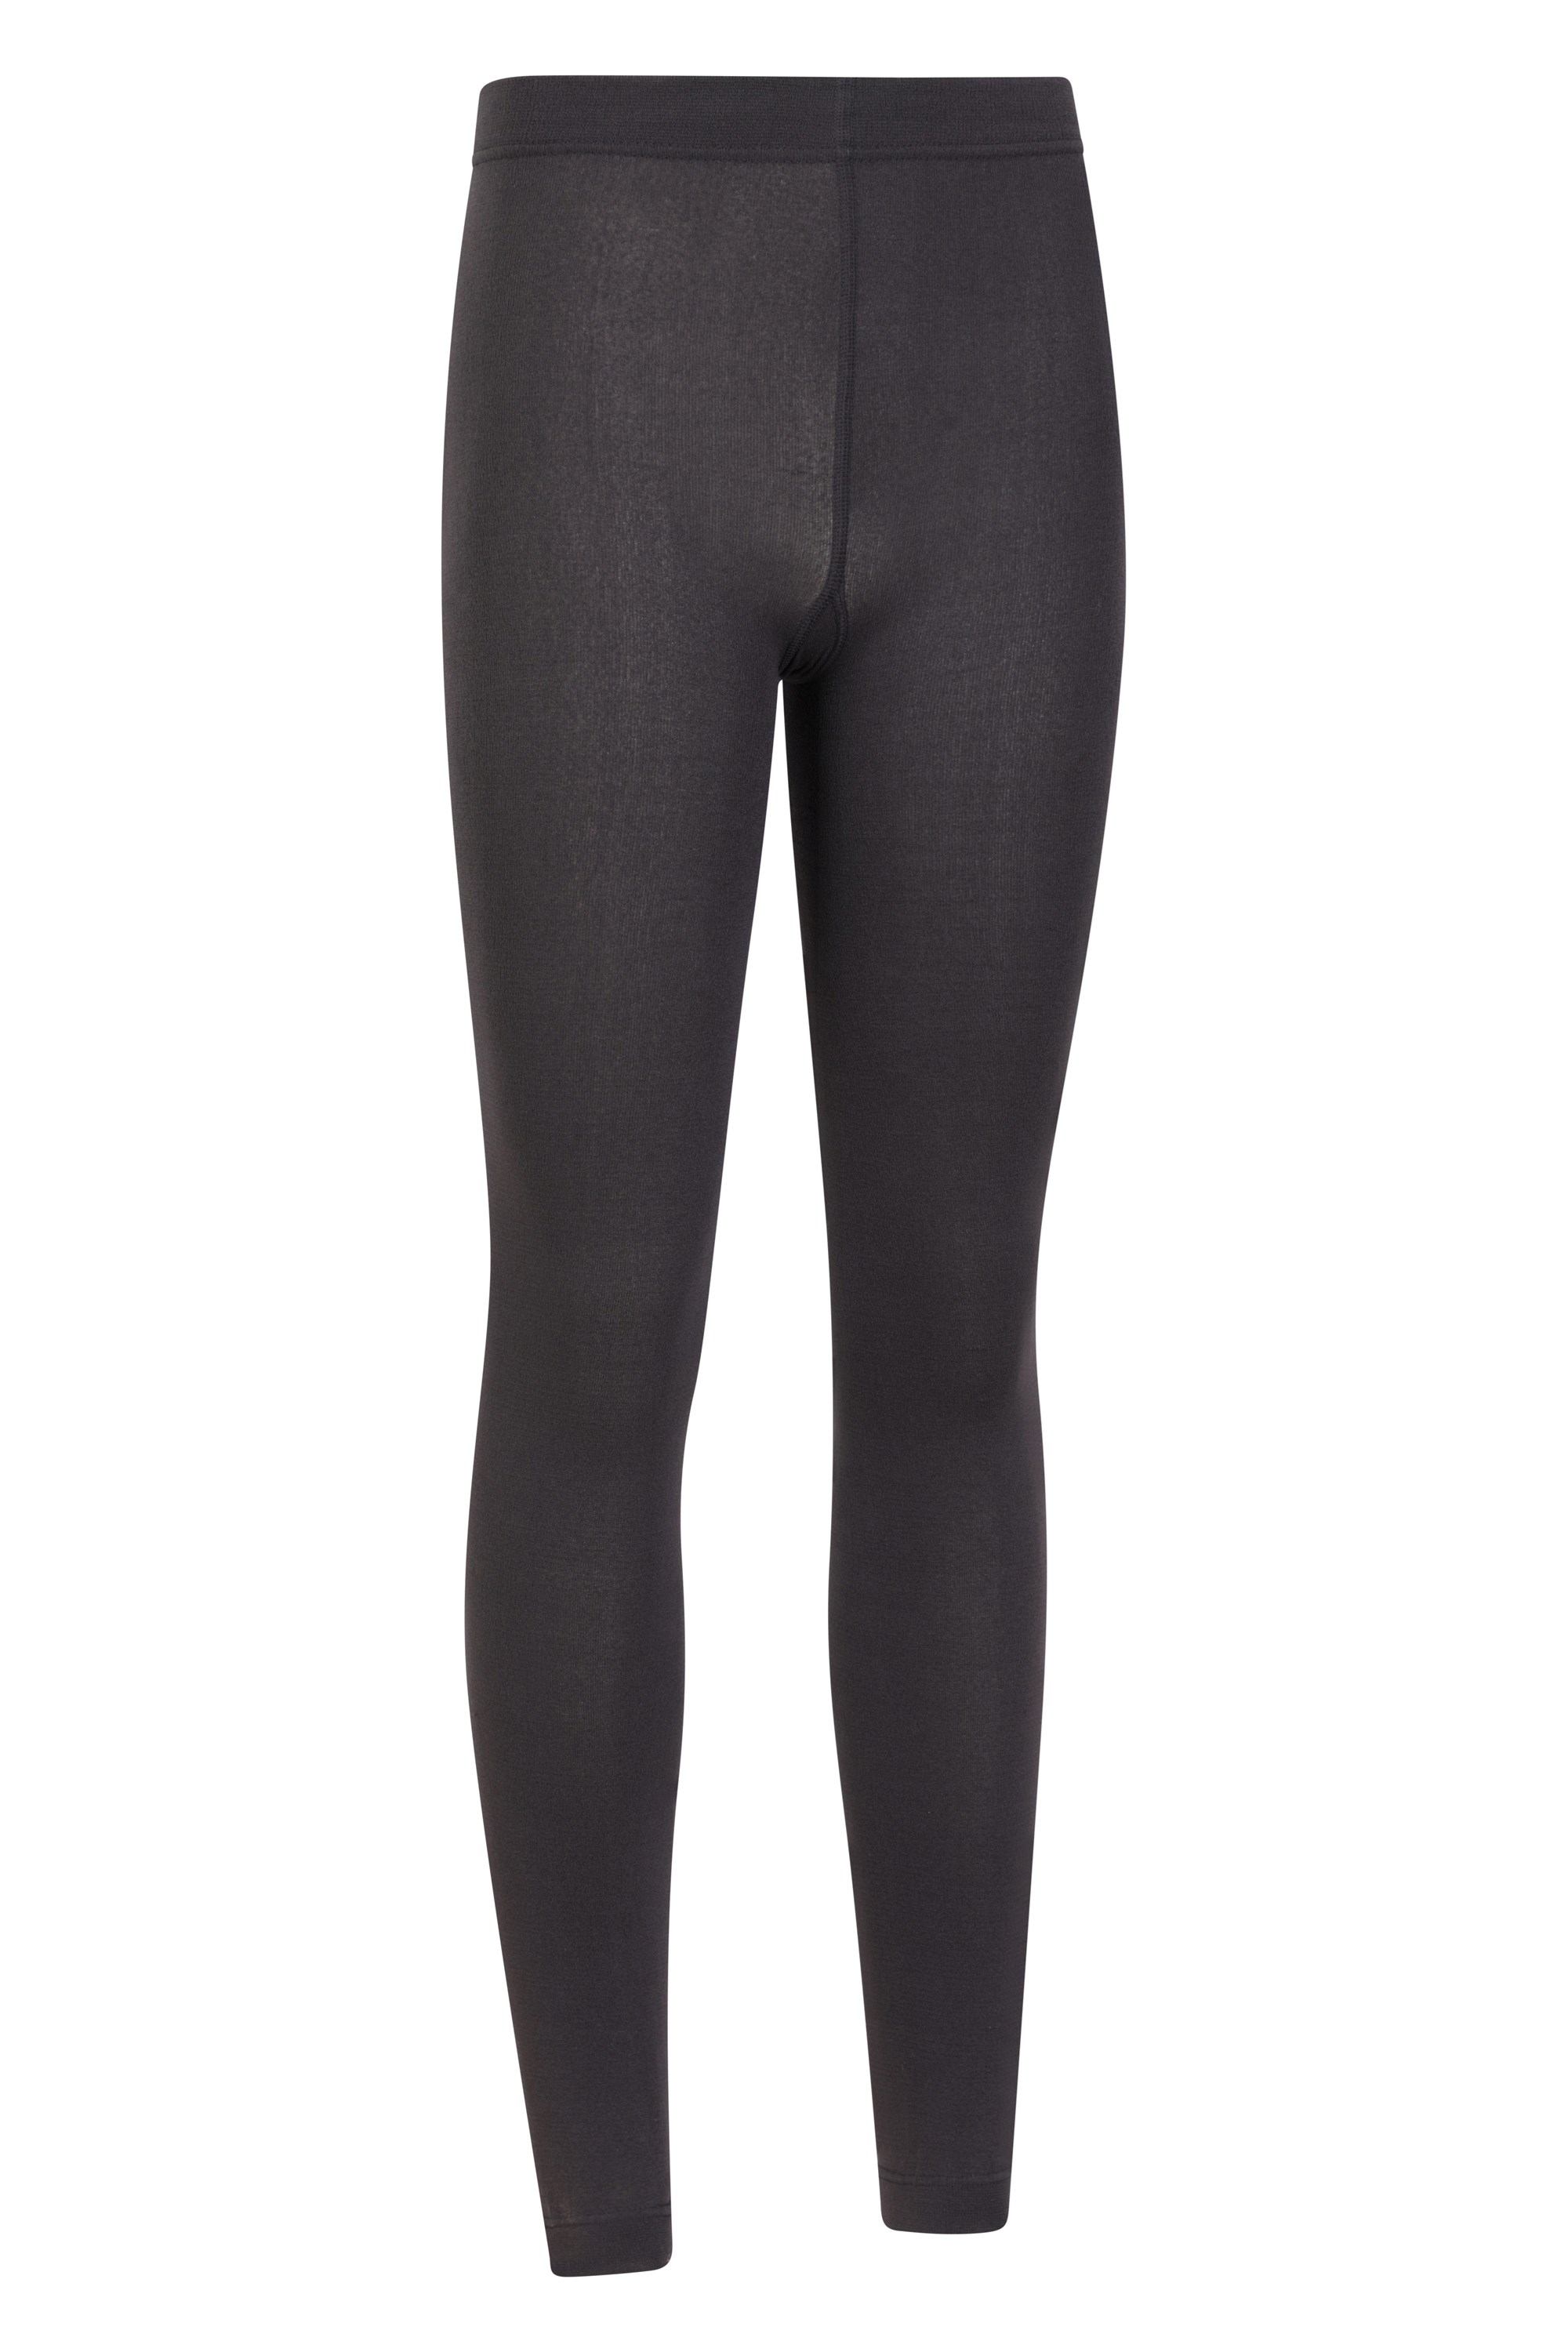 IsoTherm Womens Brushed Thermal Leggings